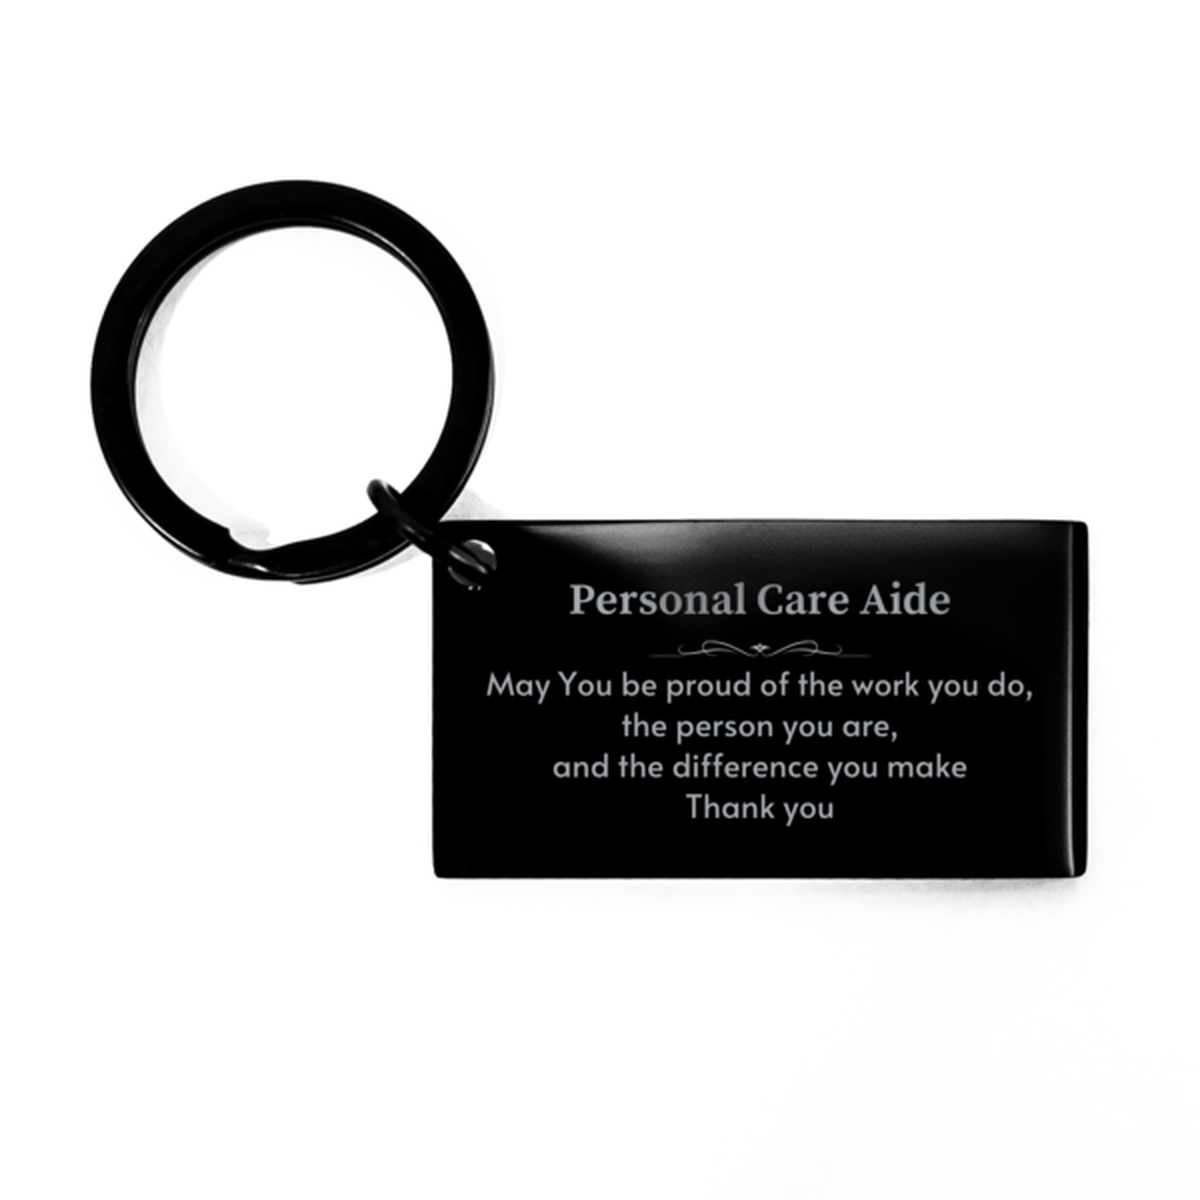 Heartwarming Keychain Retirement Coworkers Gifts for Personal Care Aide, Registered Nurse May You be proud of the work you do, the person you are Gifts for Boss Men Women Friends